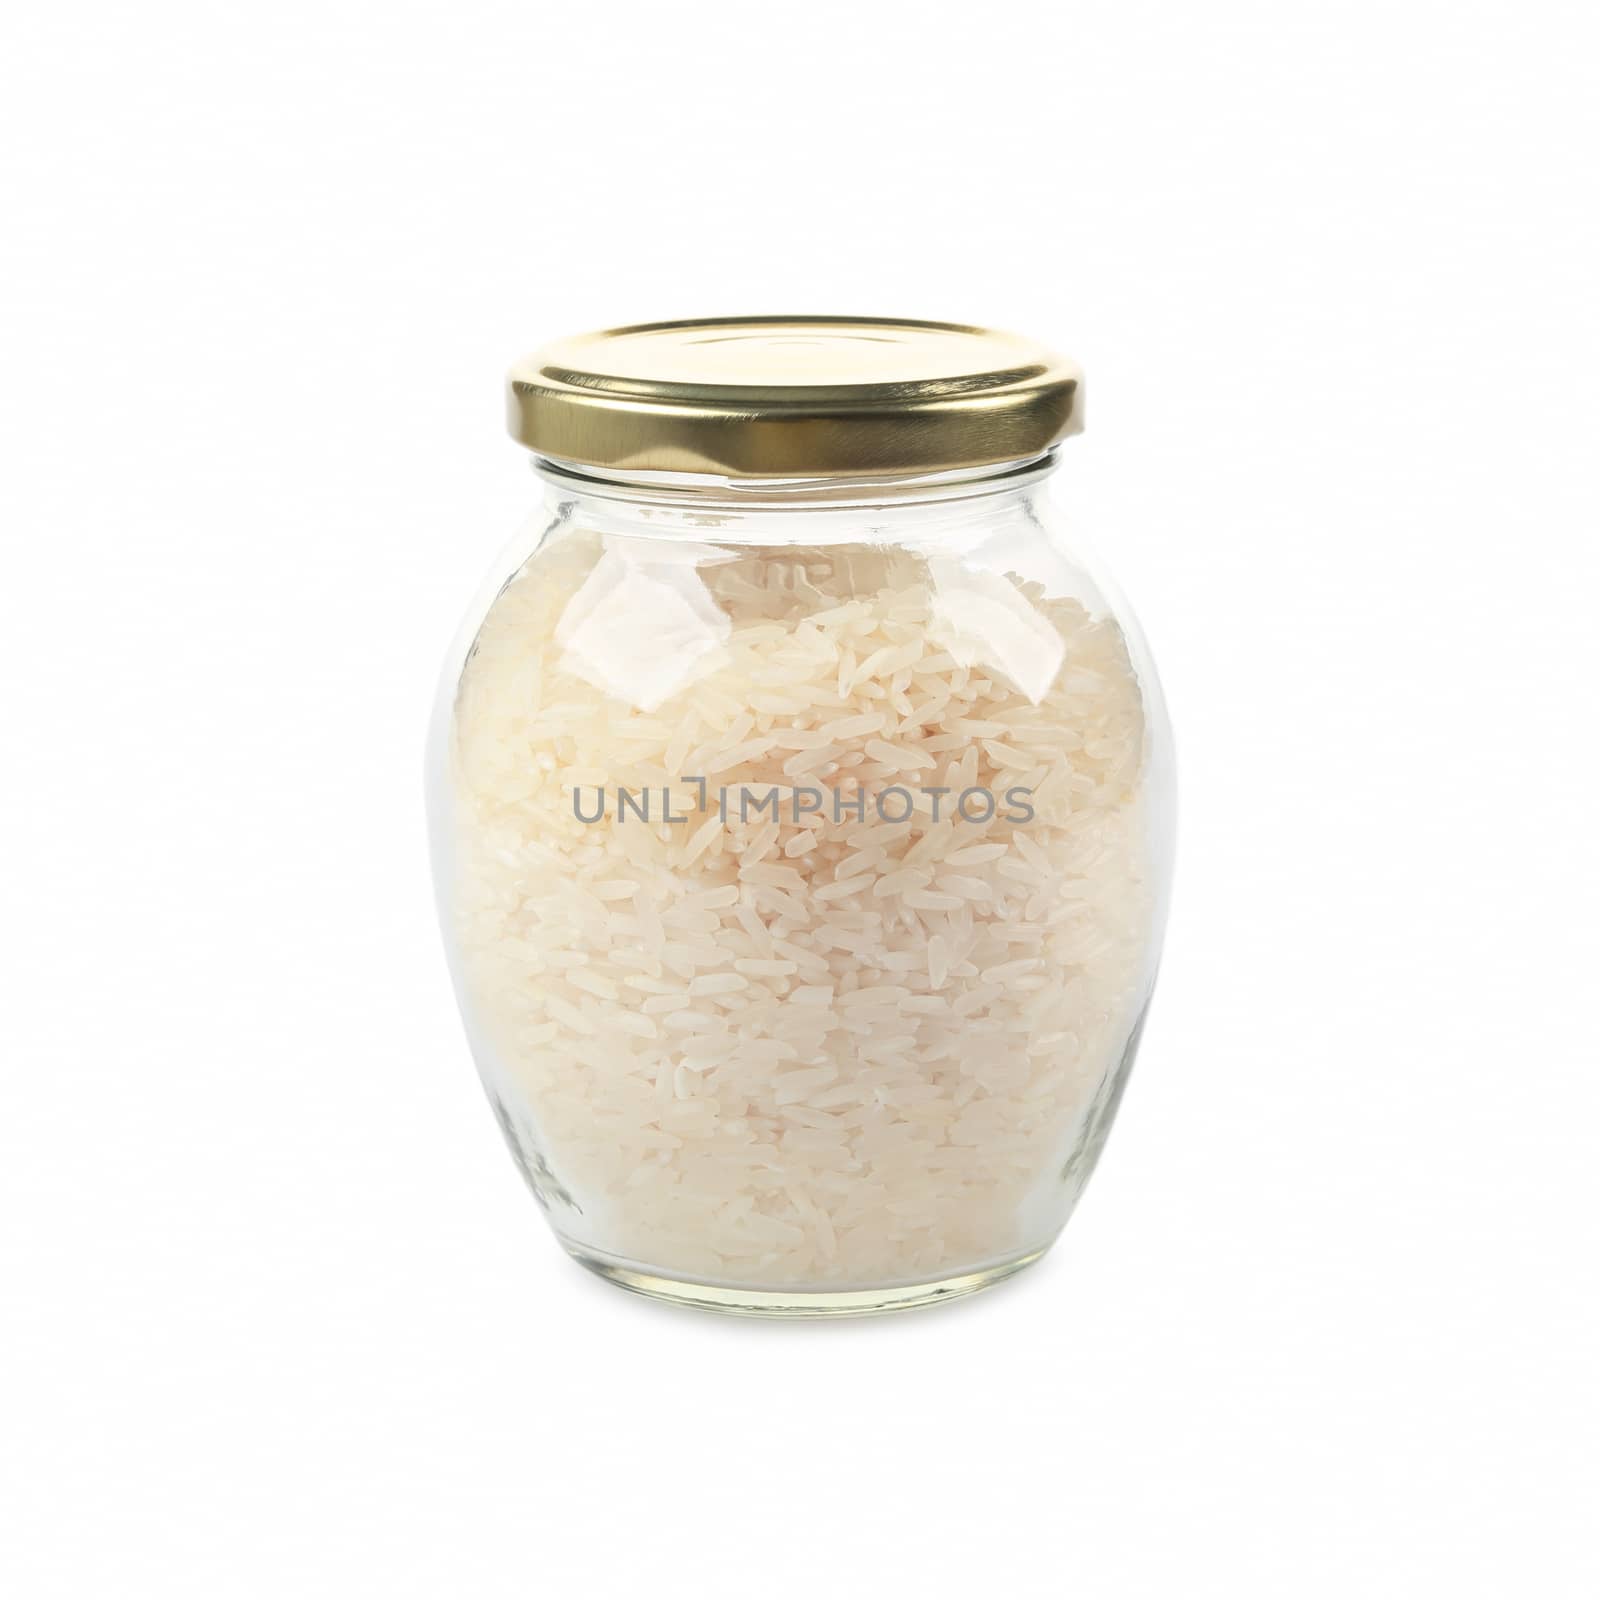 White rice in glass jar isolated on white background.